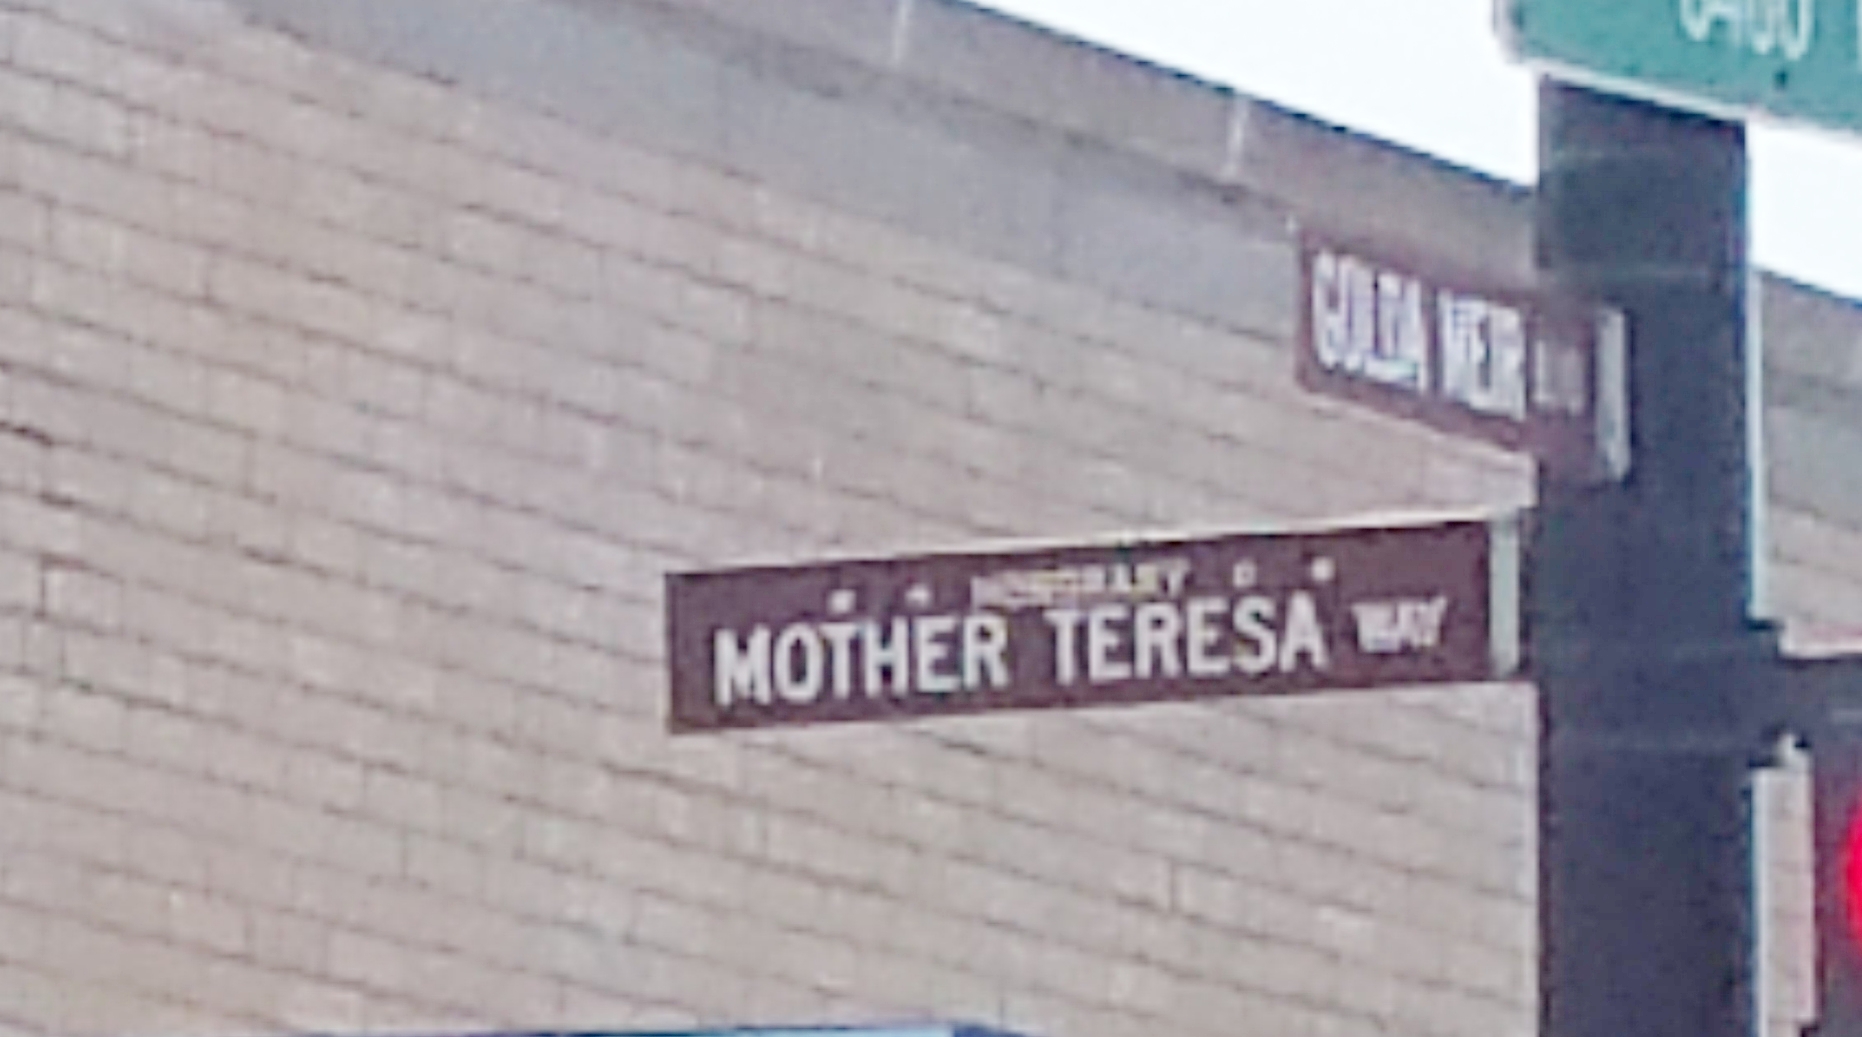 Mother Teresa and Golda Mier Chicago street signs